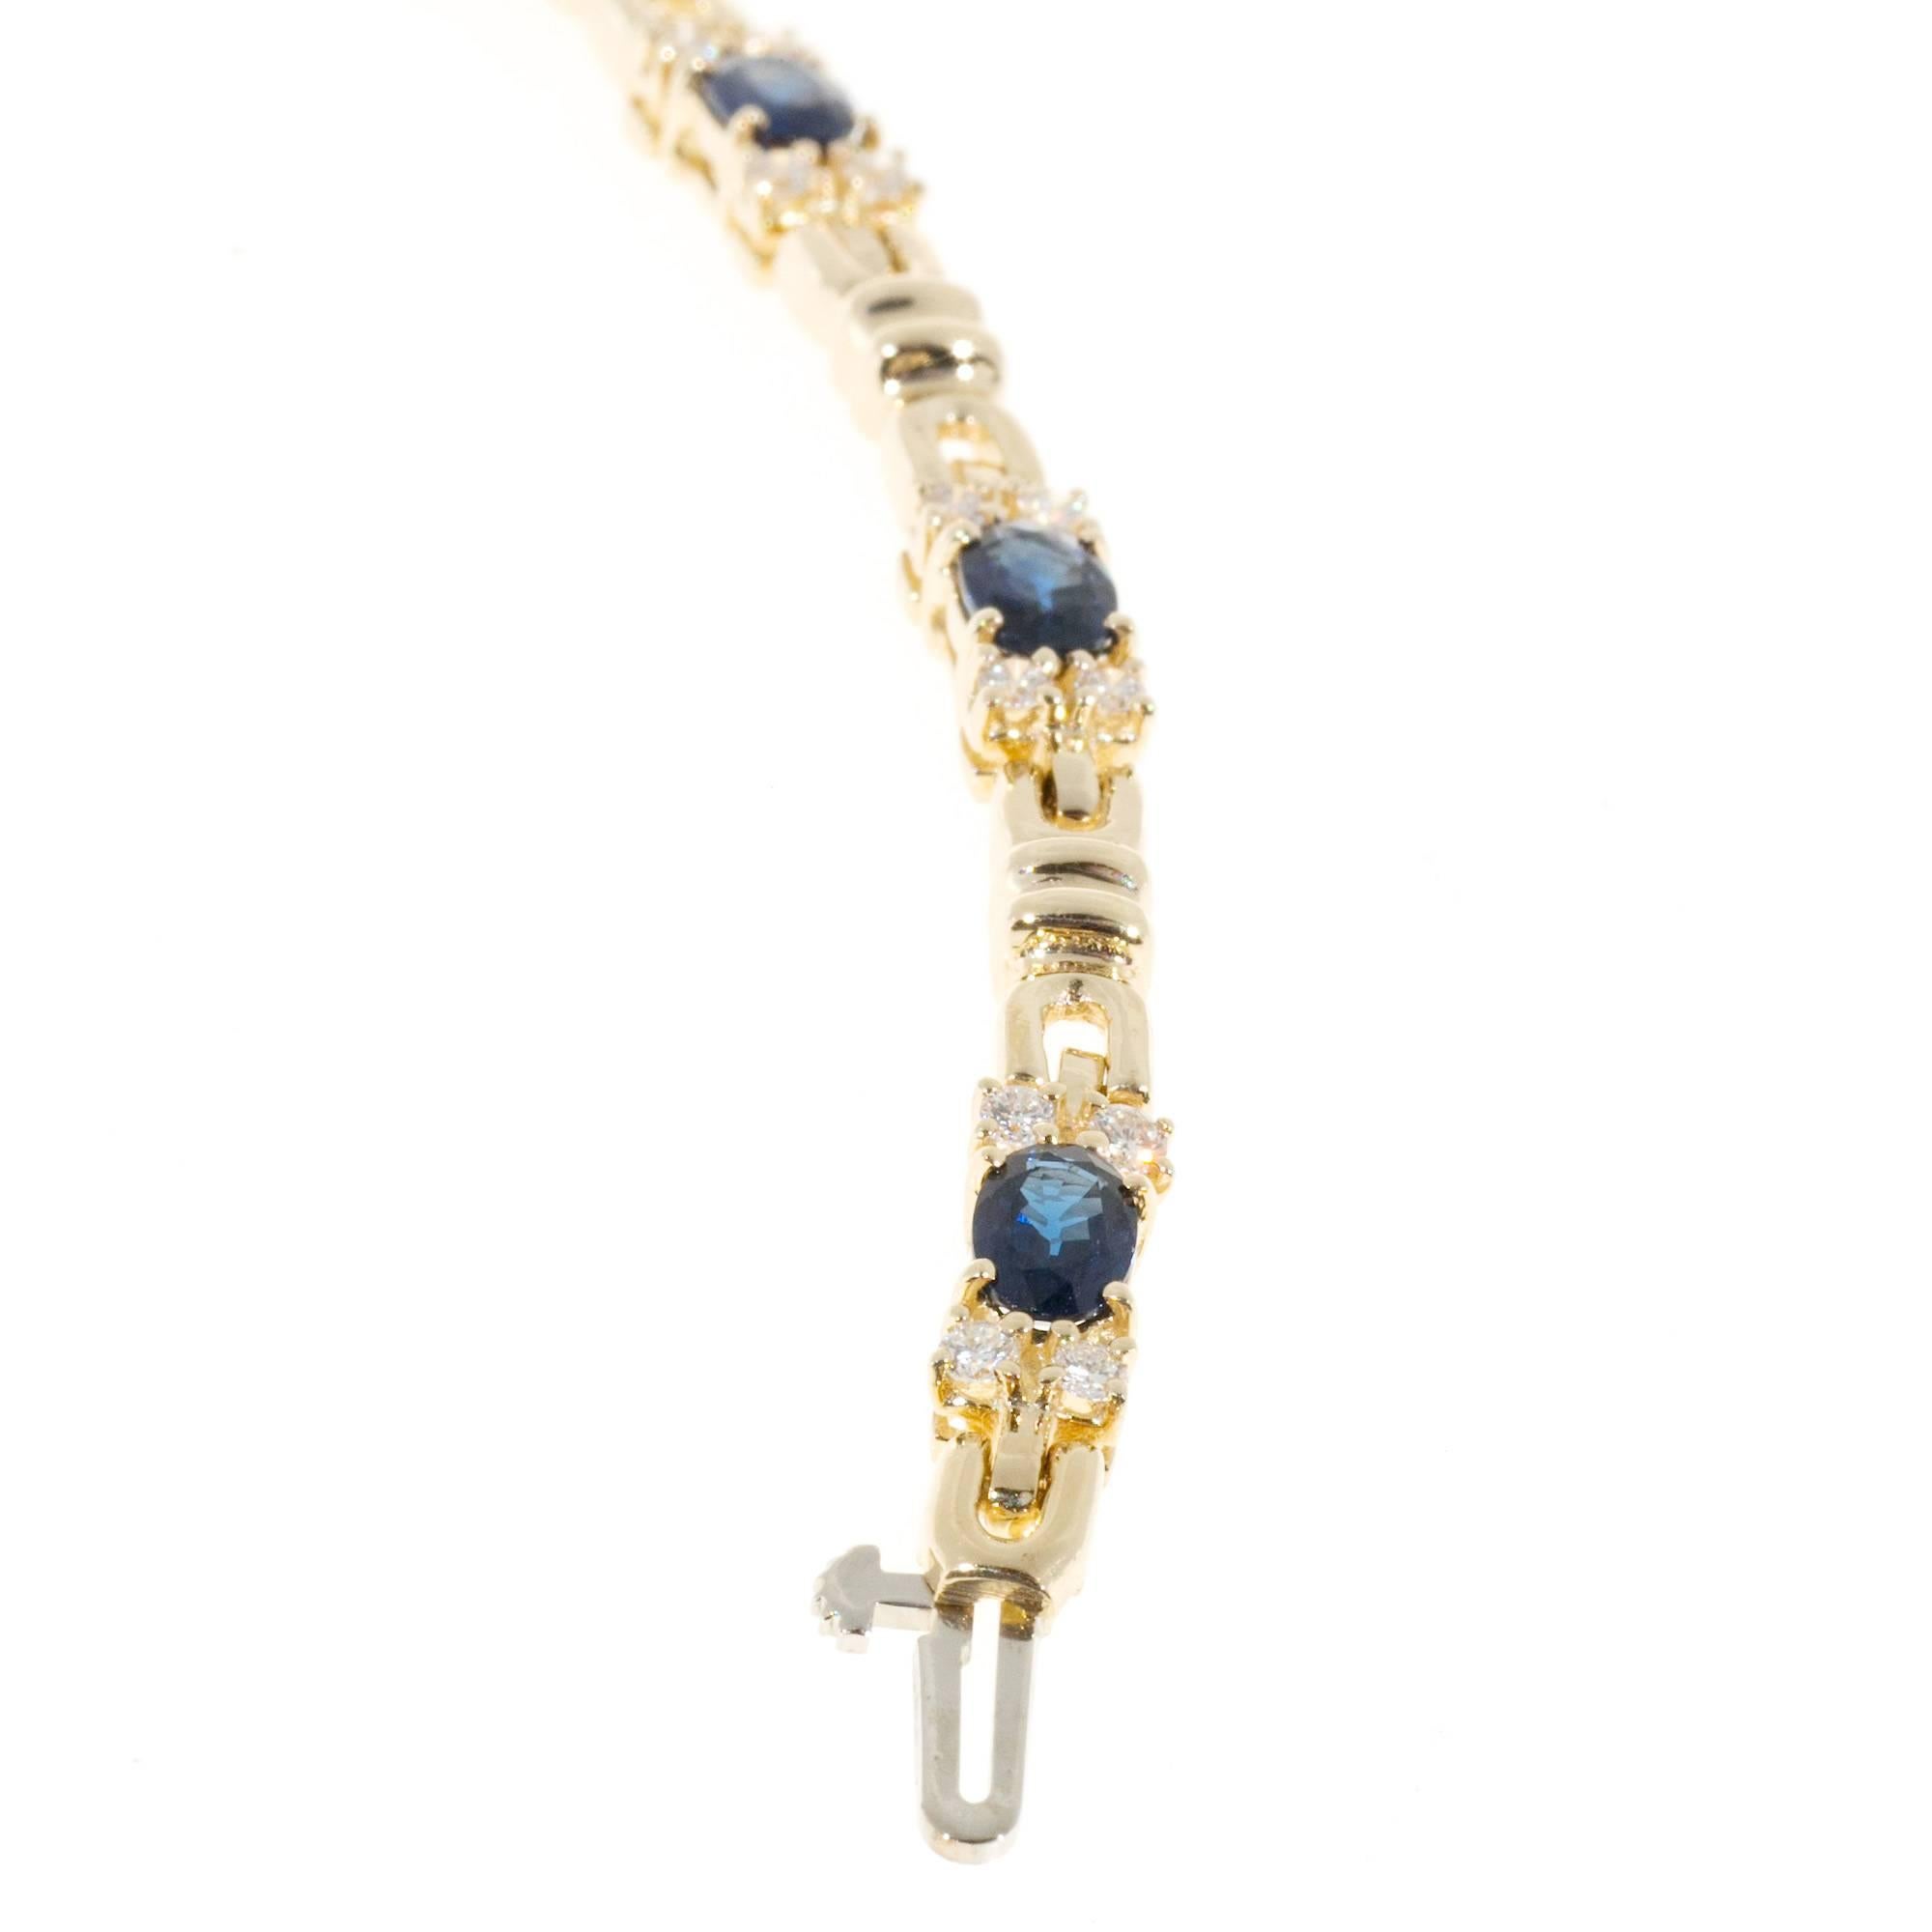 Cornflower blue Sapphire diamond 14k yellow gold hinged link bracelet.

7 bright blue oval Sapphire, approx. total weight 4.20cts, VS, 5.7 x 6.3mm, natural color and simple heat only
28 full cut diamonds, approx. total weight .70cts, H to I, VS2